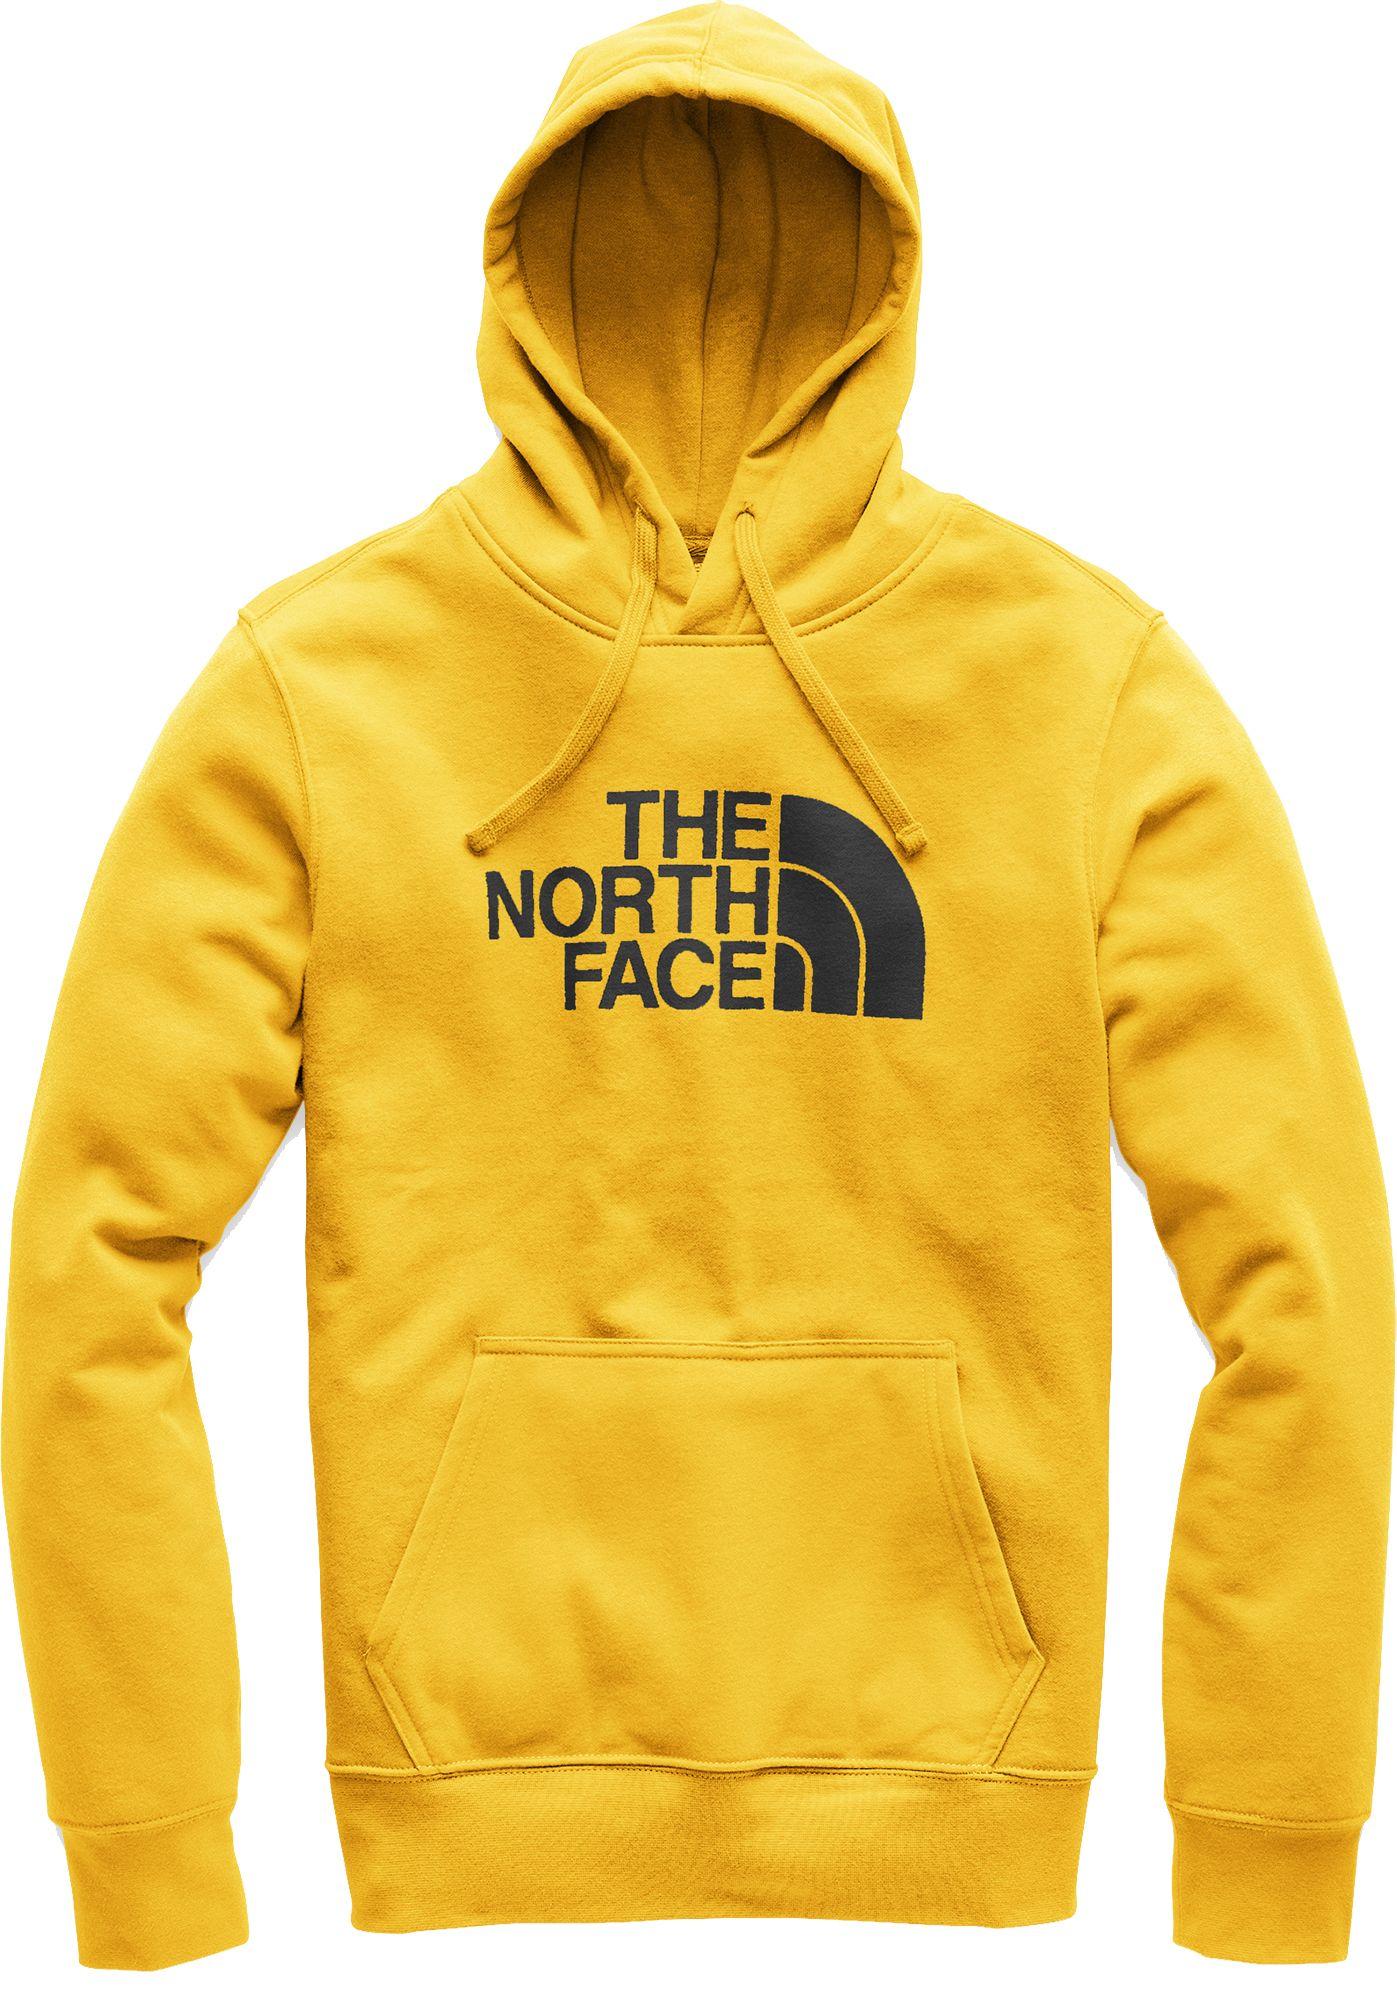 The North Face Cotton Half Dome Fashion Hoodie in Yellow for Men - Lyst